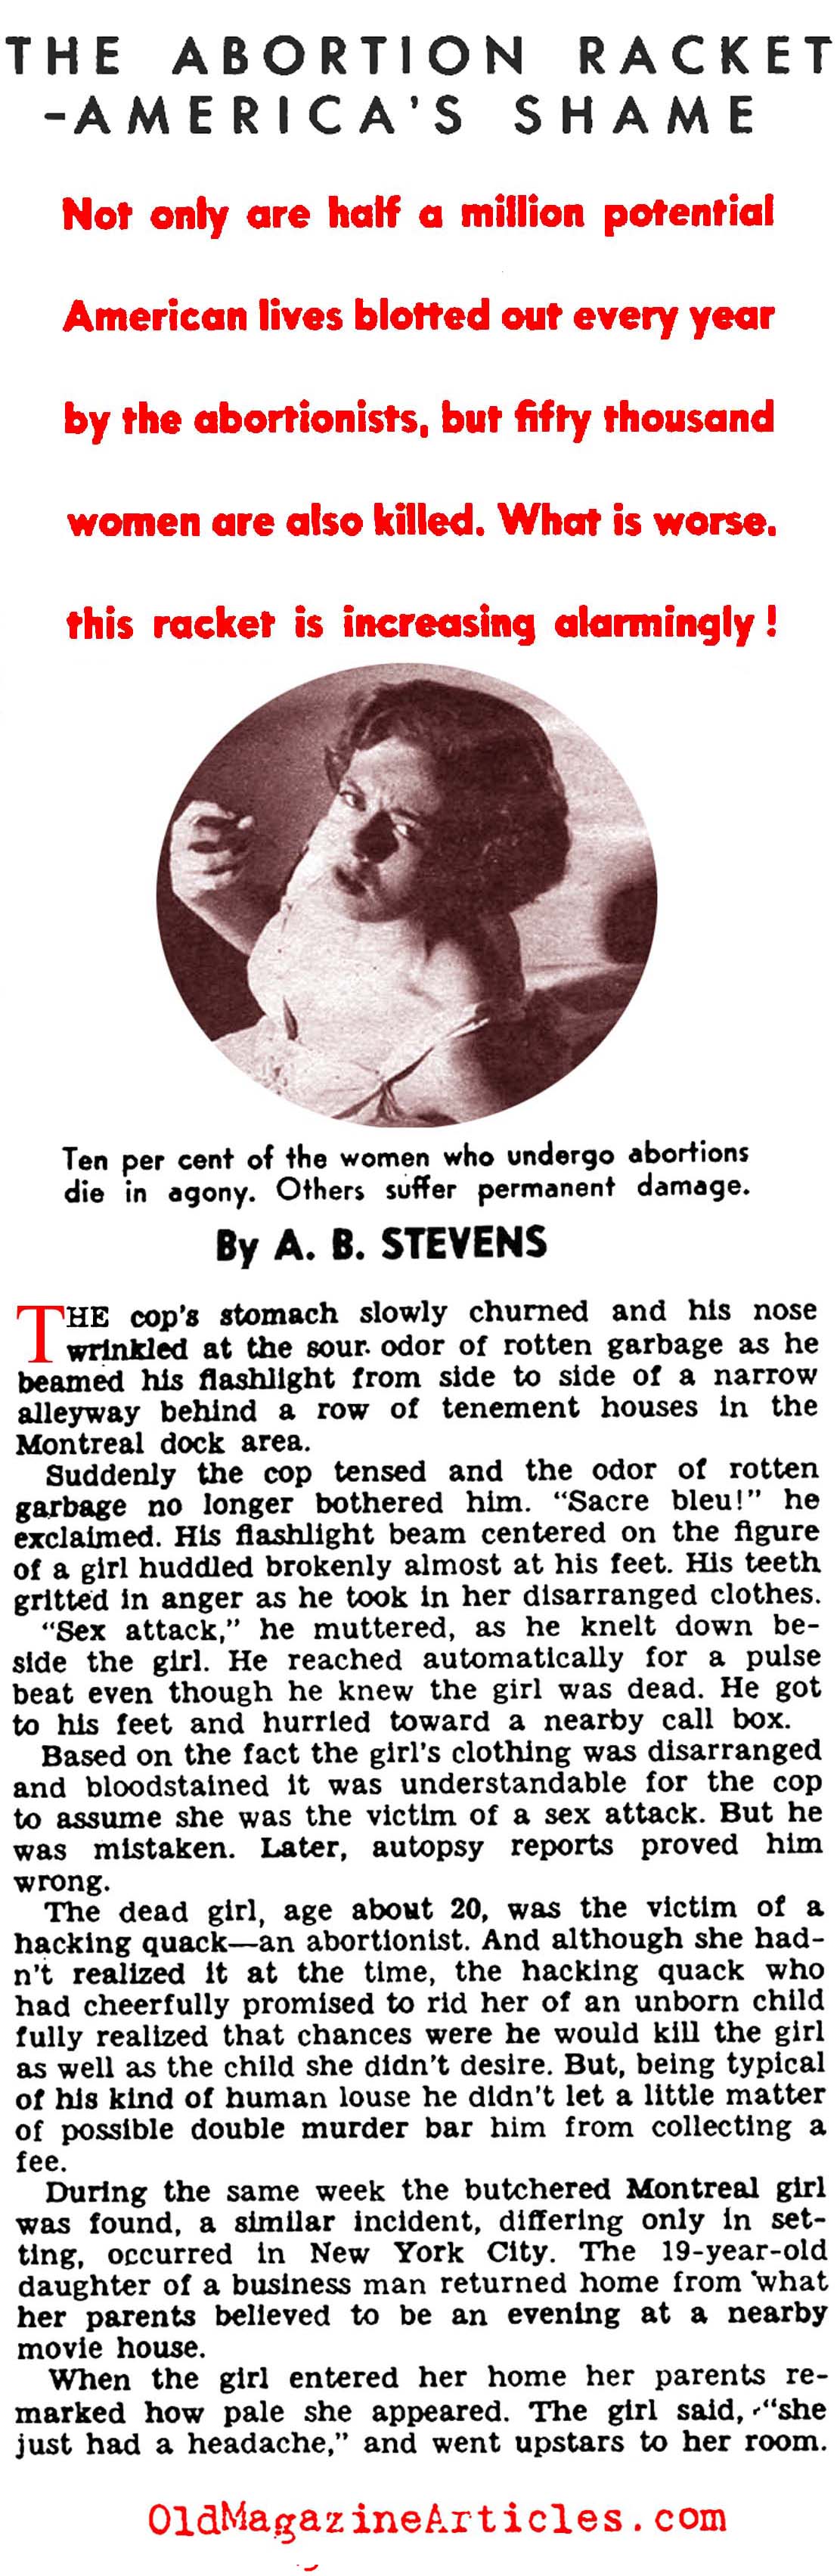 Article against abortion